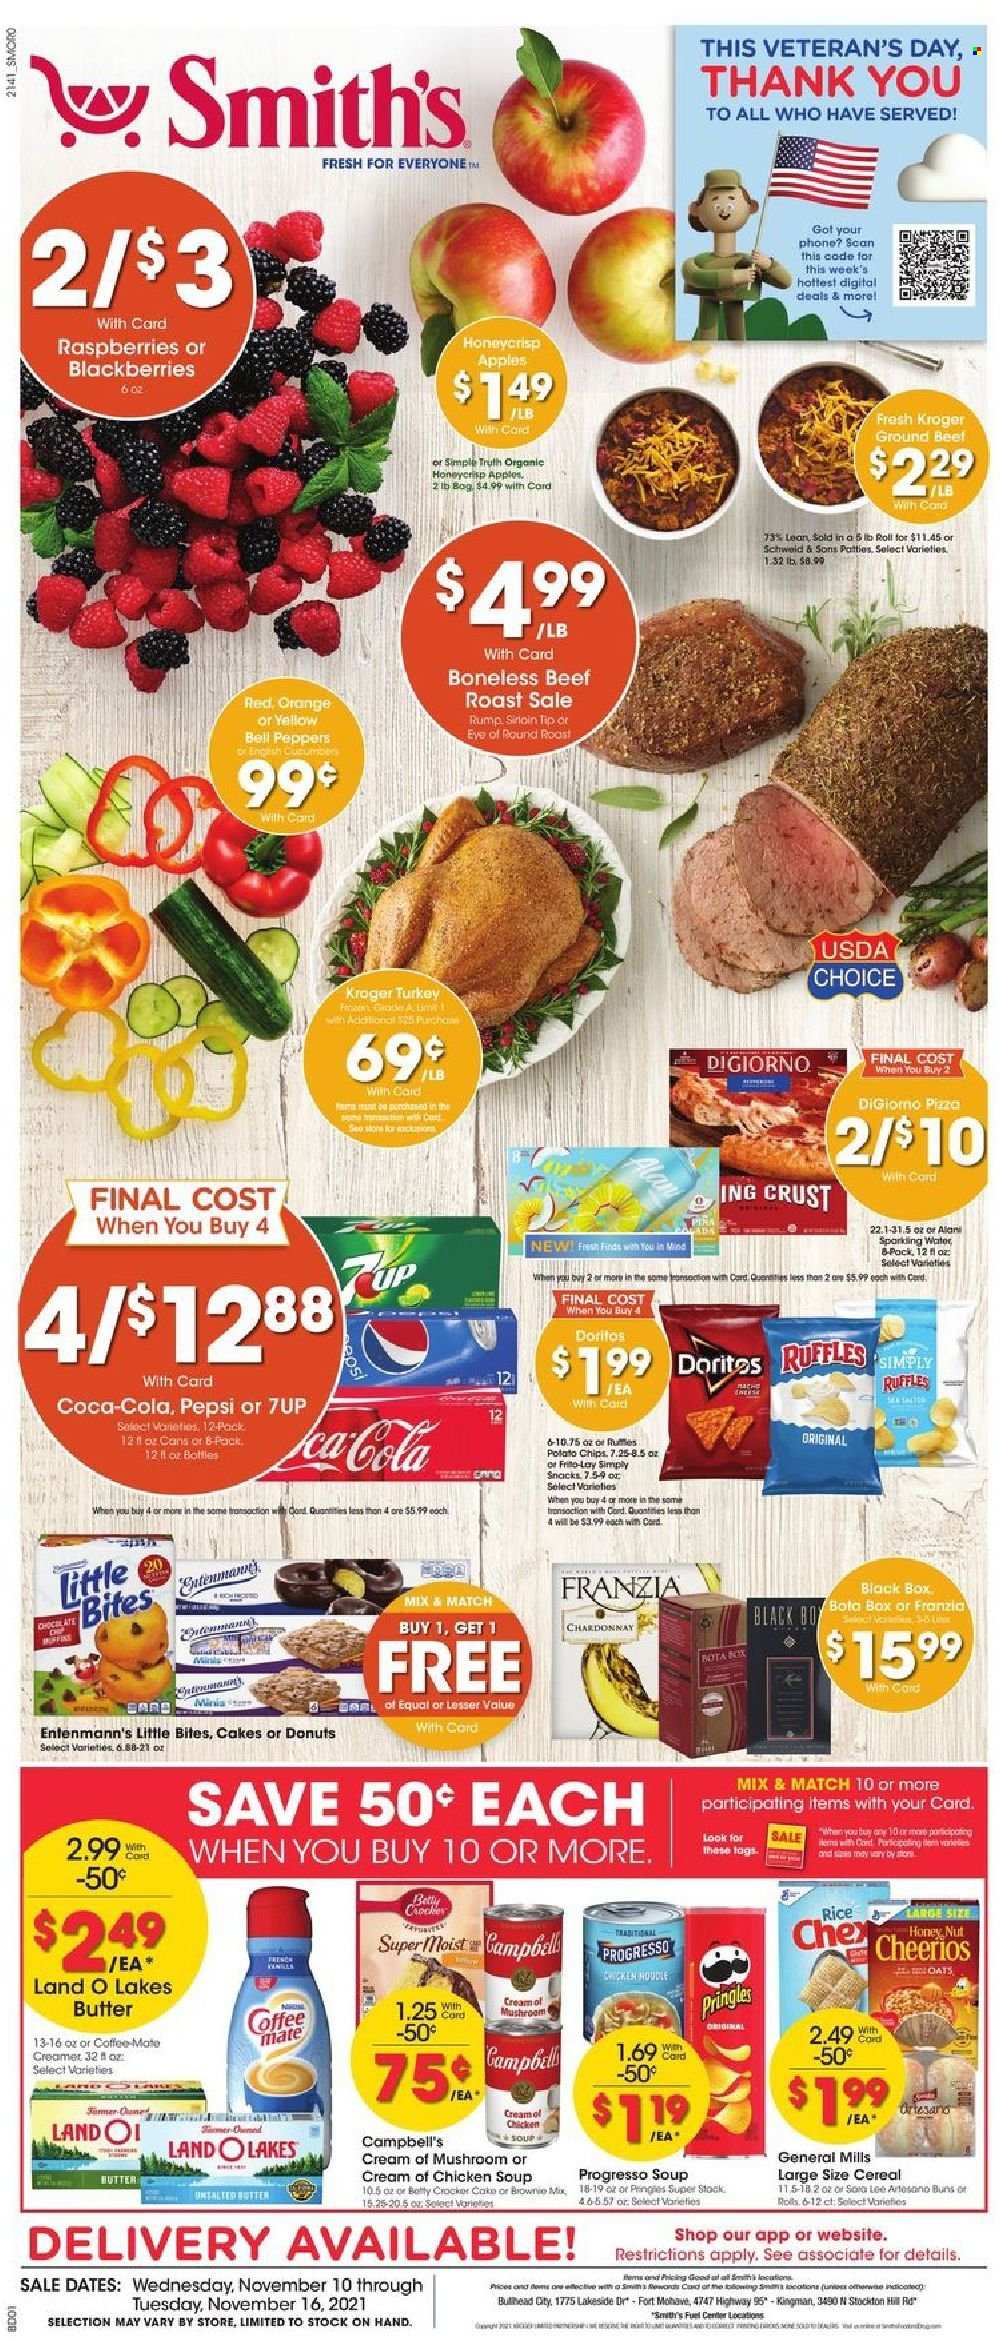 Smith's Flyer - 11/10/2021 - 11/16/2021 - Sales products - cake, buns, donut, Entenmann's, brownie mix, bell peppers, cucumbers, peppers, apples, blackberries, orange, cod, Campbell's, pizza, chicken soup, Progresso, Coffee-Mate, butter, creamer, snack, Little Bites, Doritos, potato chips, Pringles, chips, Smith's, Ruffles, oats, cereals, Cheerios, rice, Coca-Cola, Pepsi, 7UP, white wine, Chardonnay, wine, beef meat, ground beef, eye of round, roast beef. Page 1.